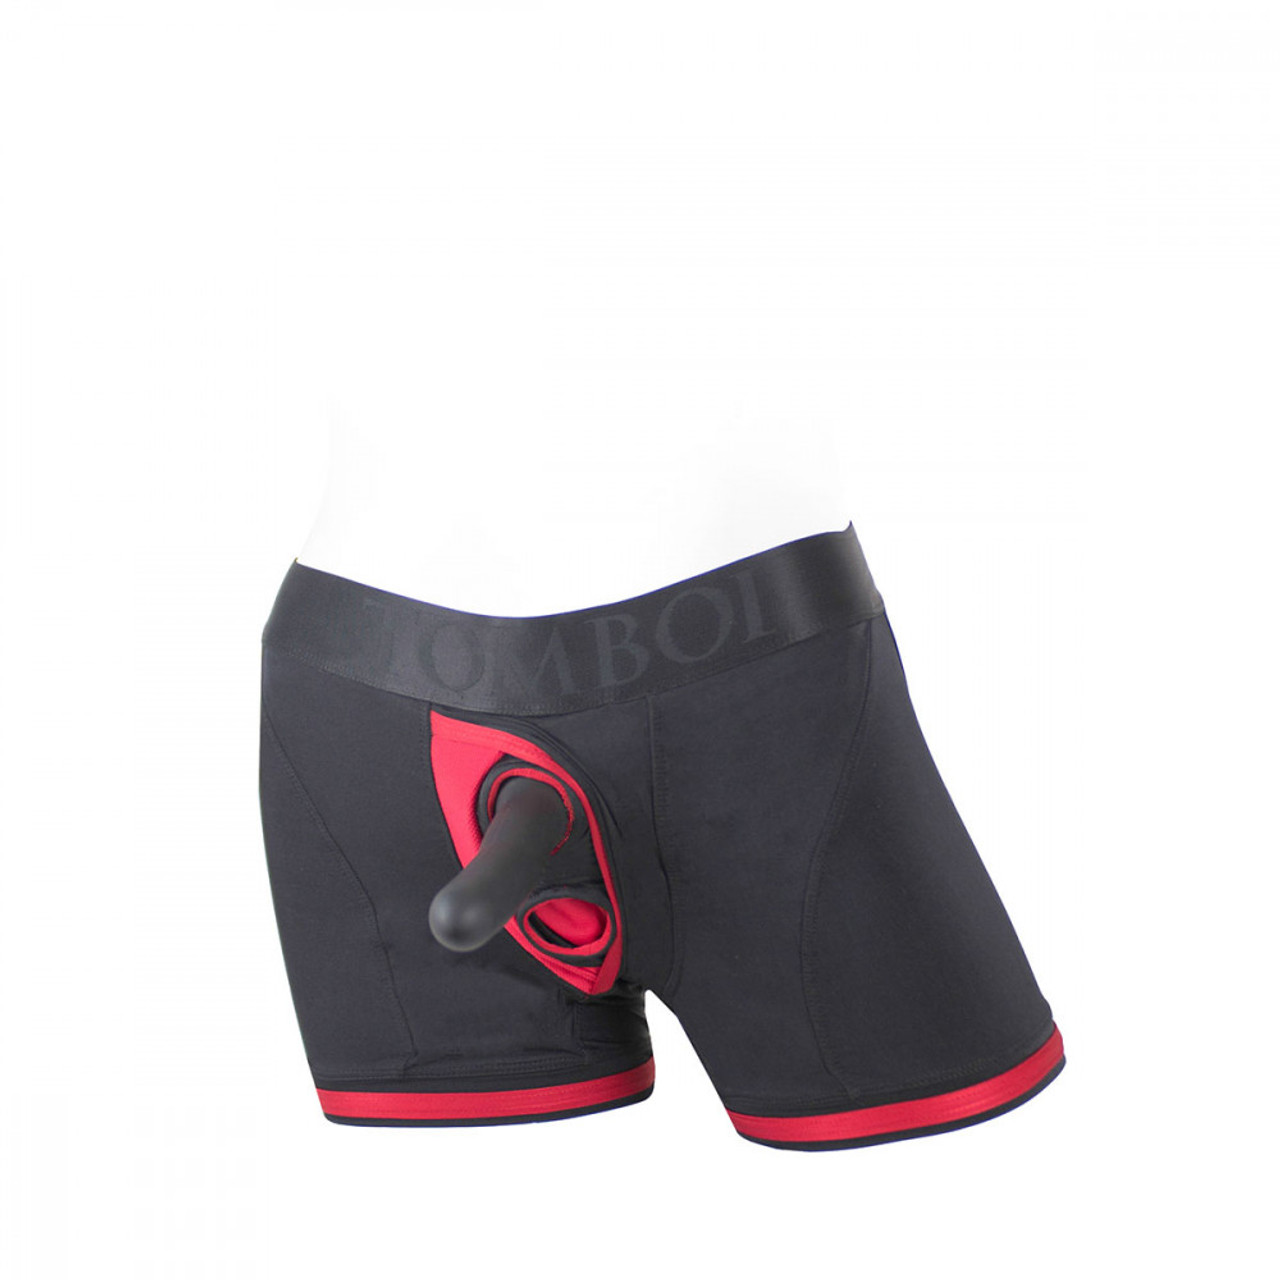 Buy the Tomboii Boxer Briefs Strap-On Harness in Black & Red